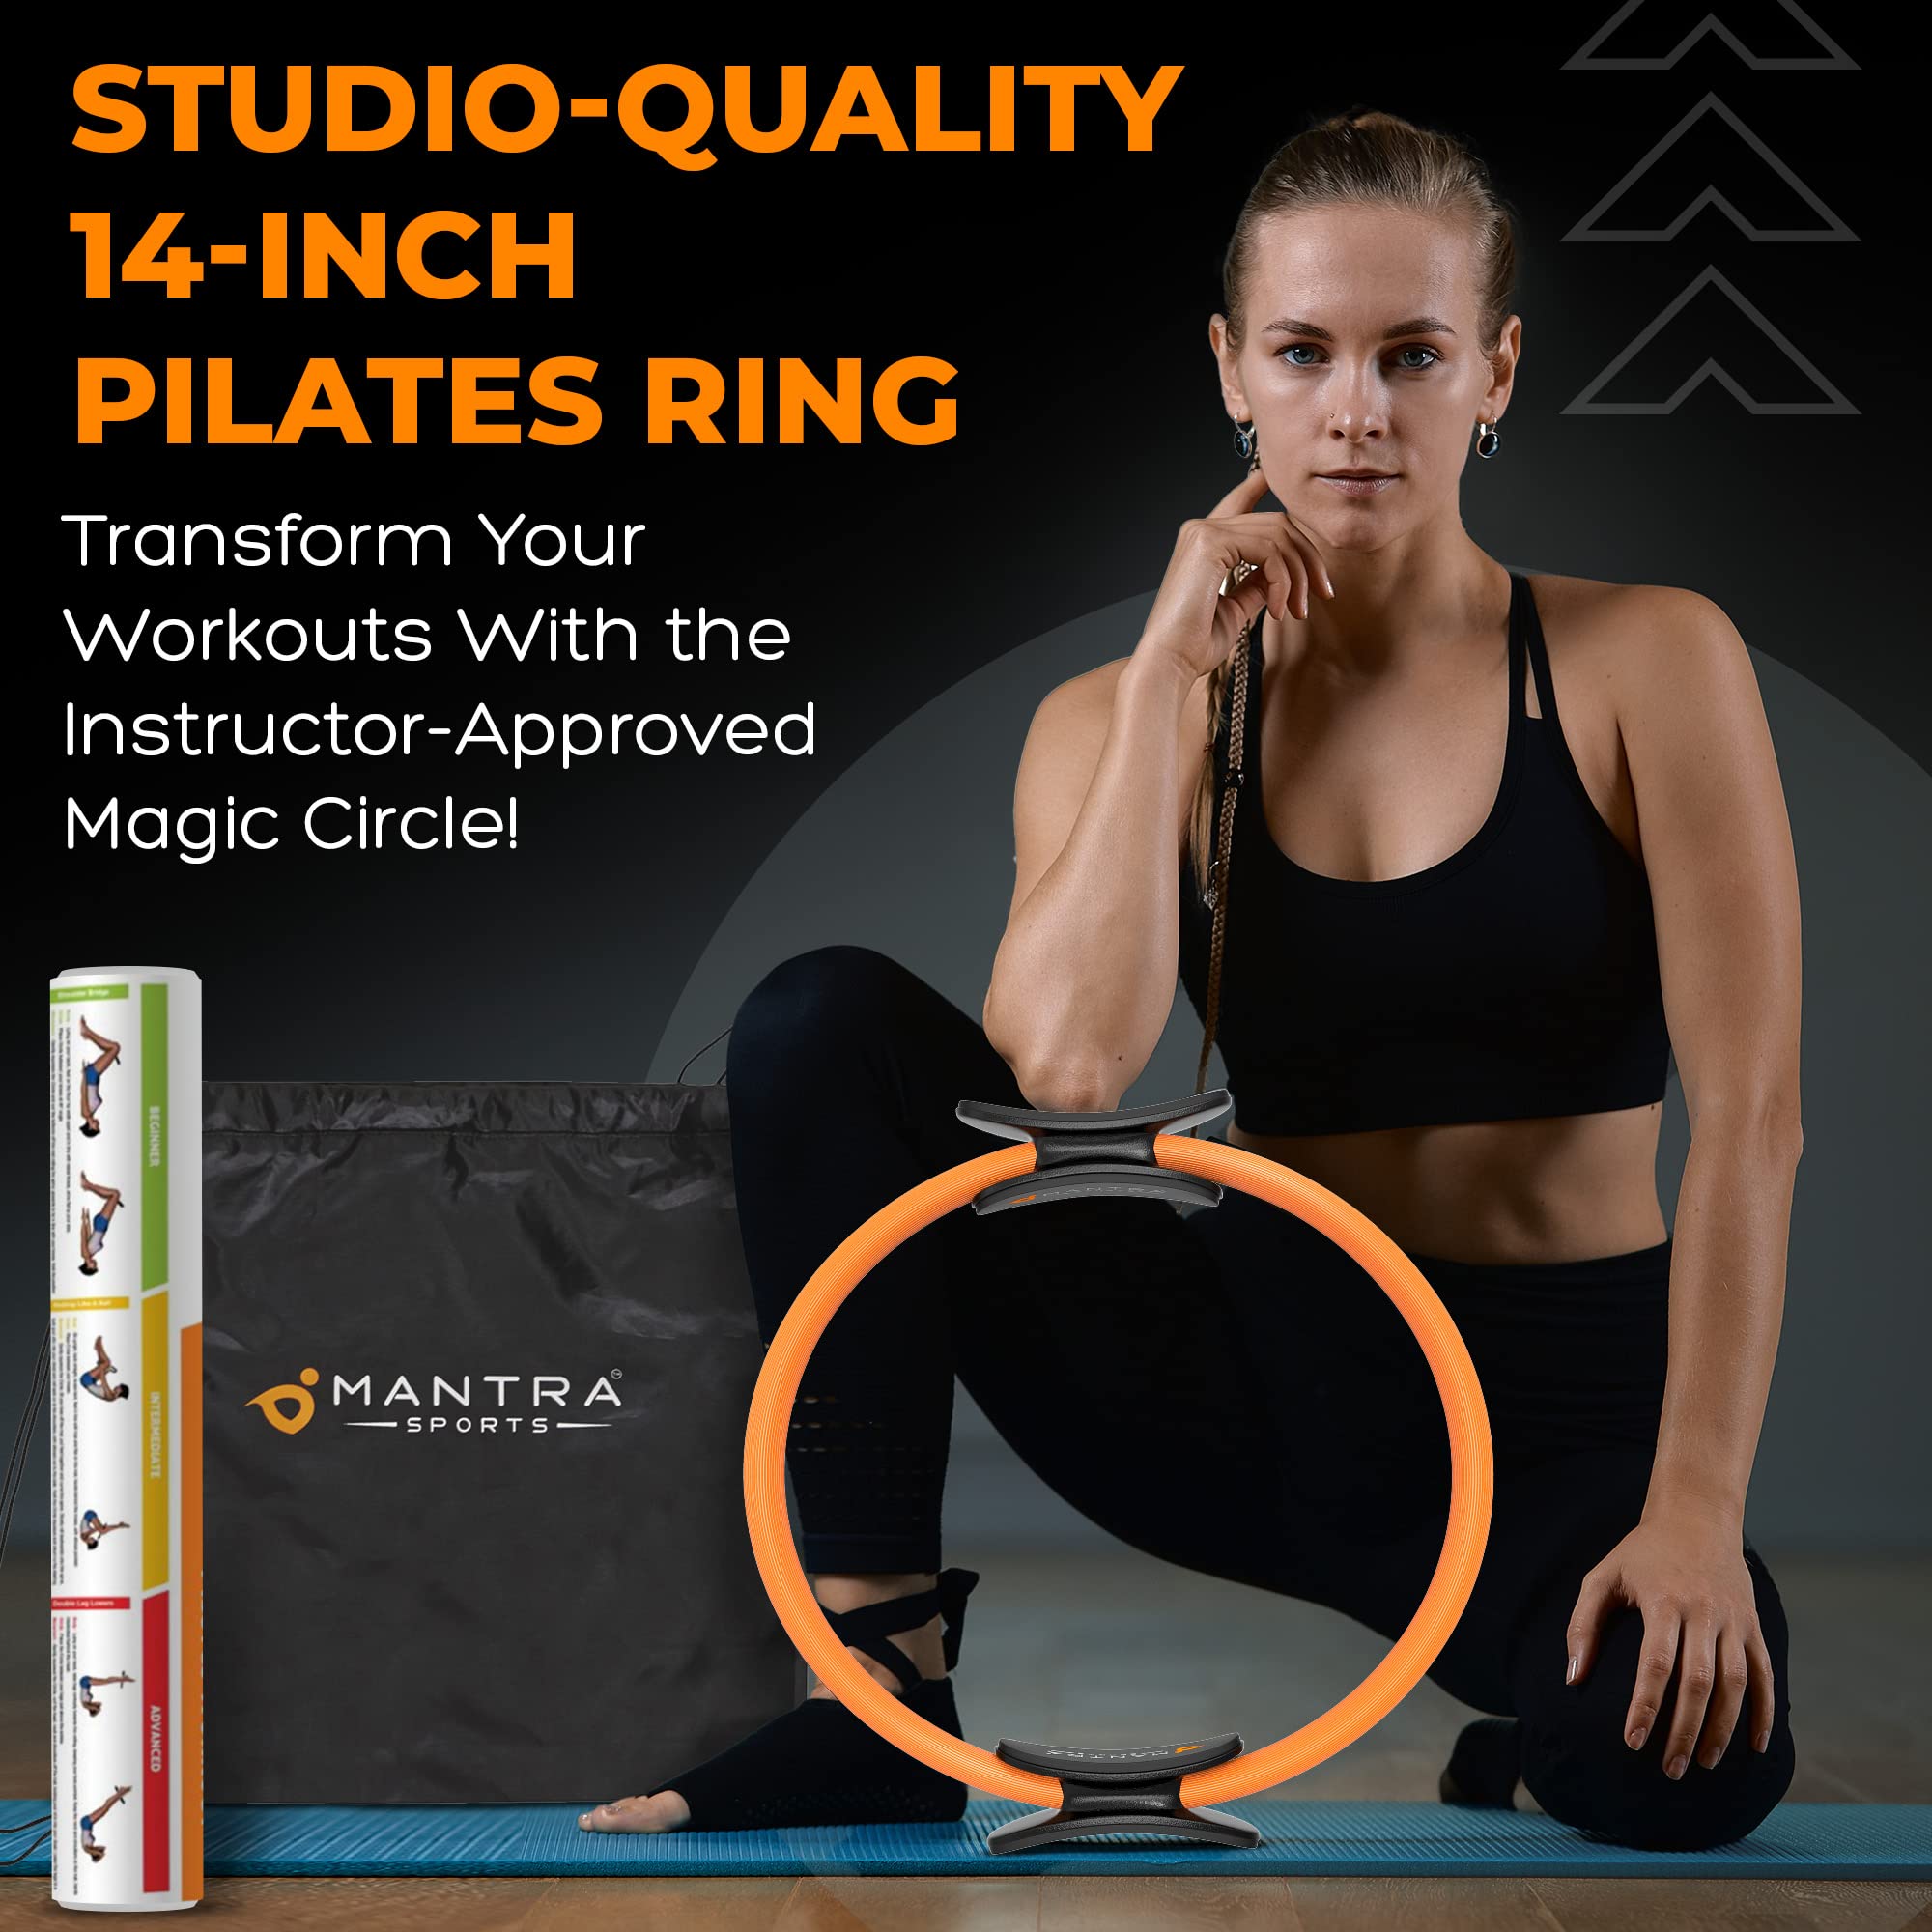 Pilates Ring Circle, Fitness Ring Magic Circle Pilates Ring 14 Inch, Inner Thigh Exercise Equipment for Women, Thigh Master Pilates Equipment for Home Workout, Pelvic Floor Muscle Trainer Power Kit